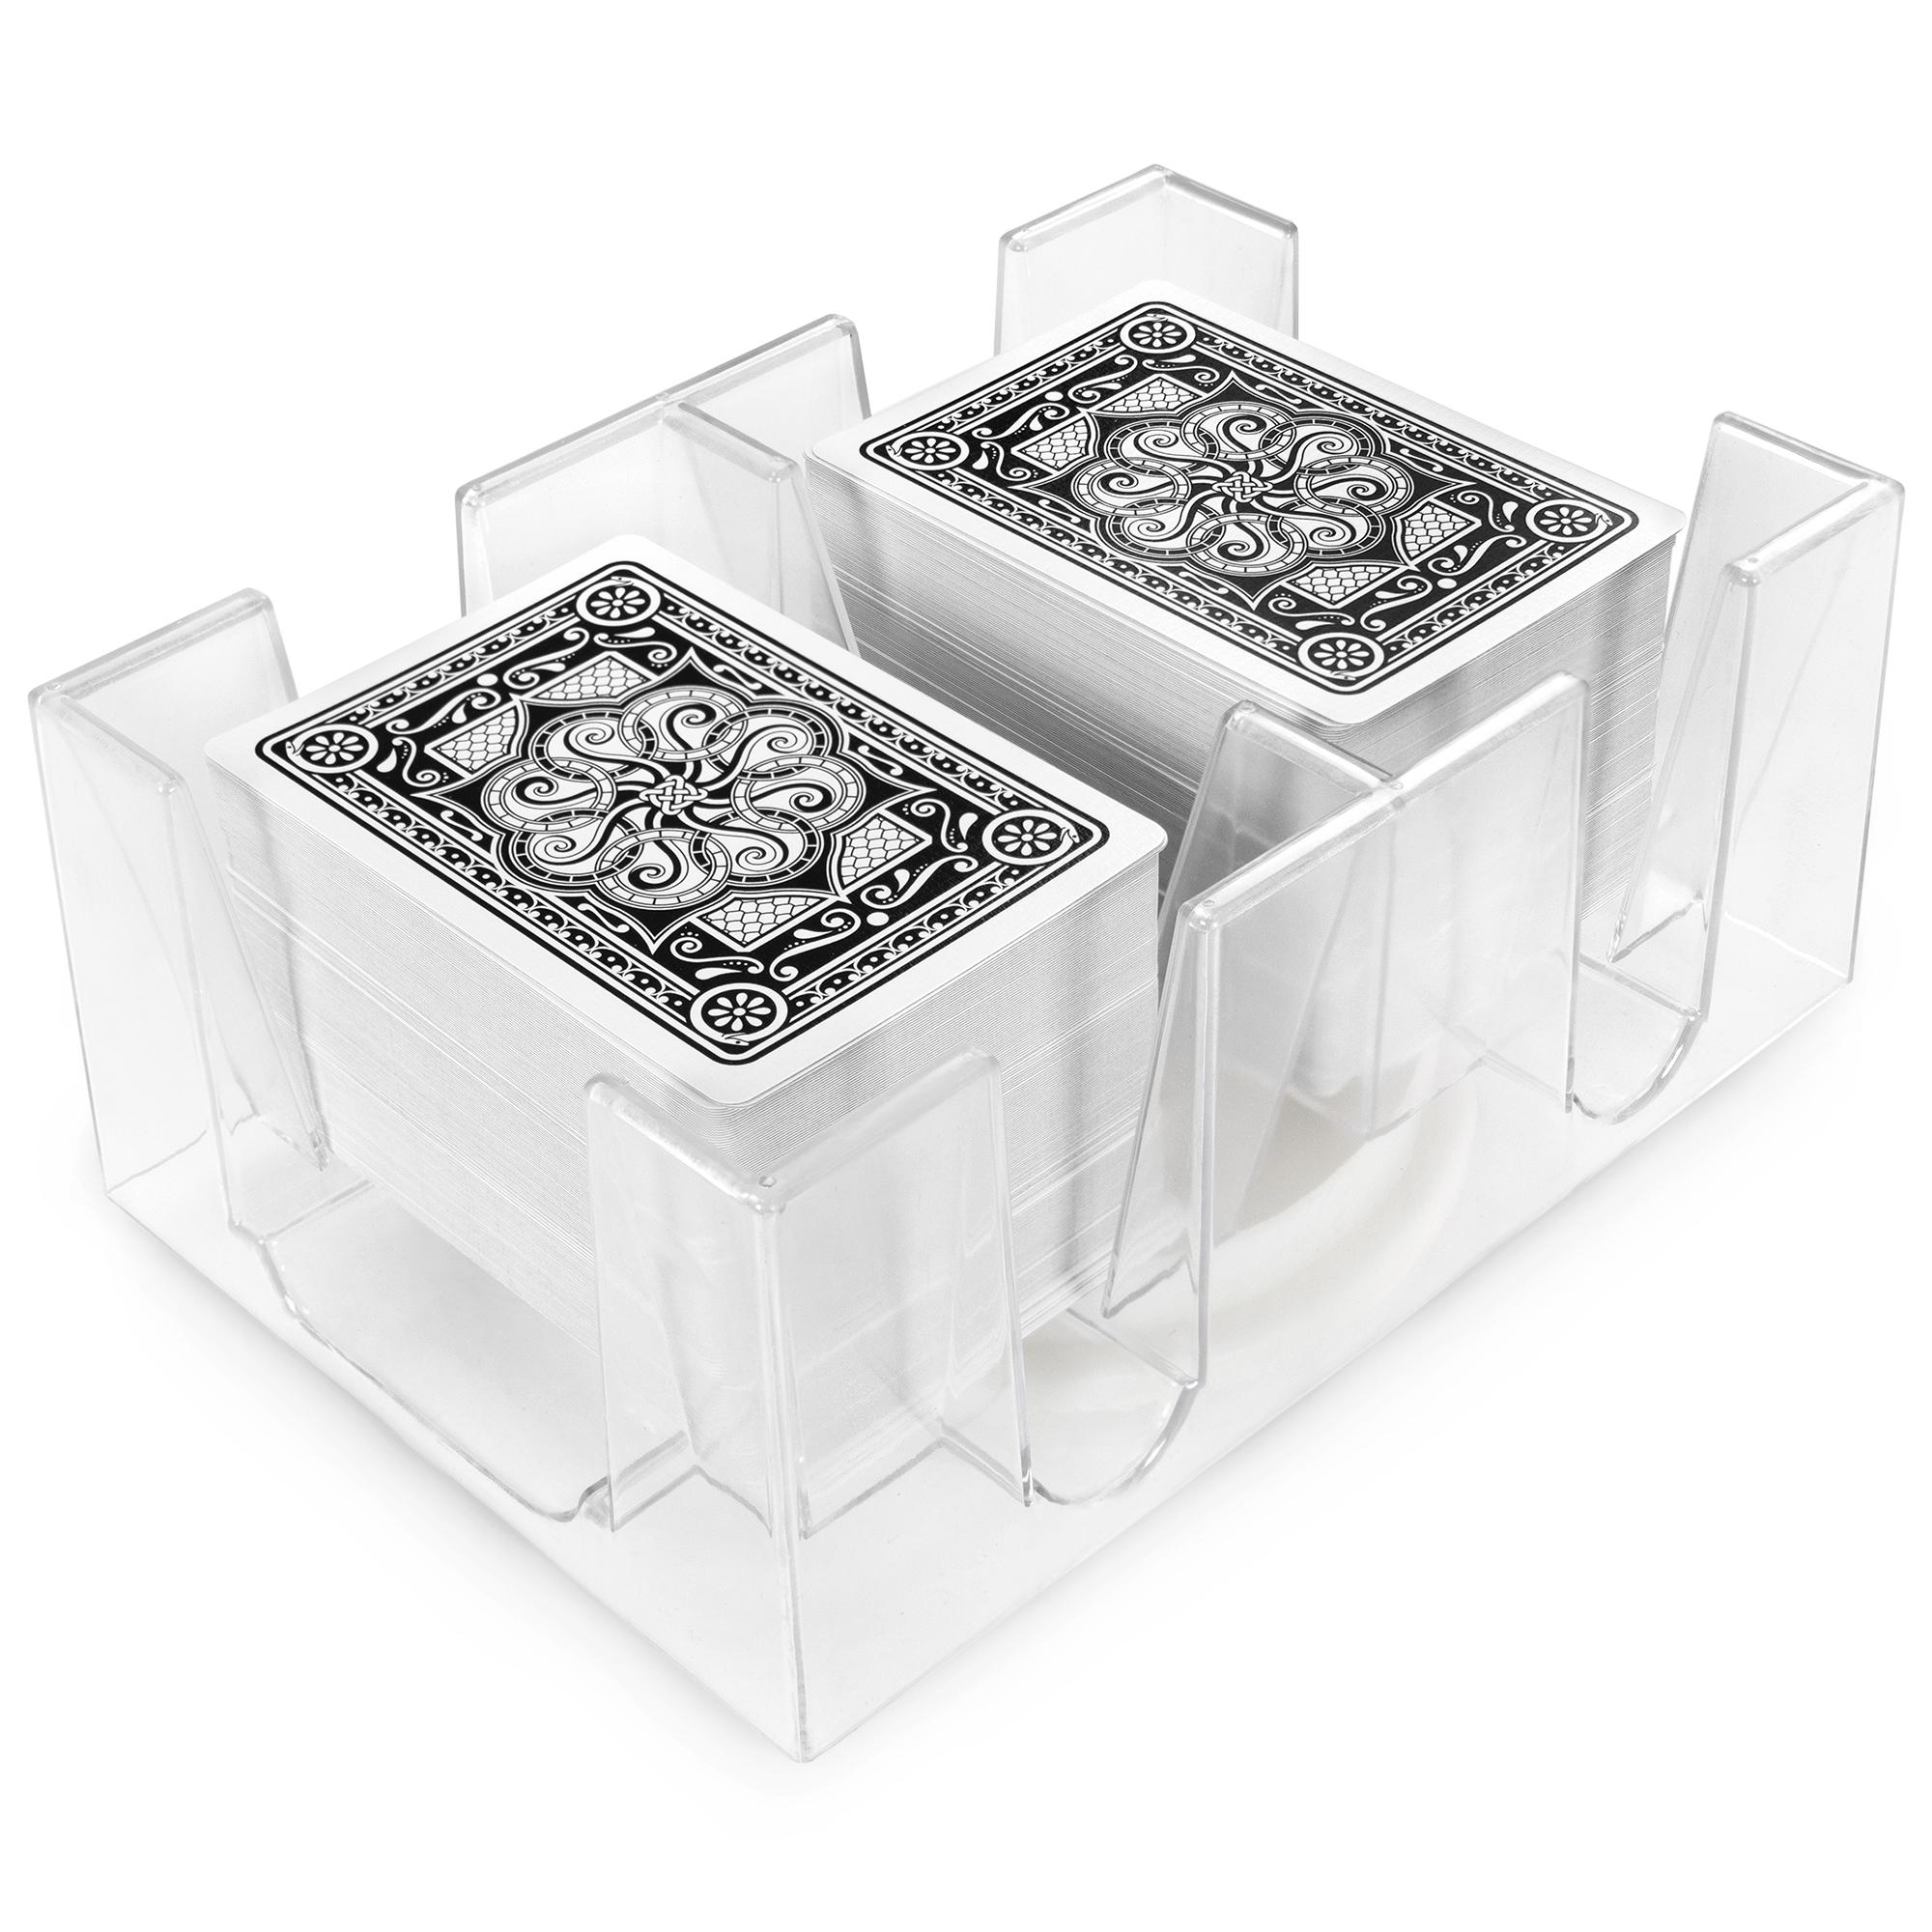 Dual Deck Revolving Card Holder - 360 Degree Revolving Holder Playing Card  Holders for Adults Clear …See more Dual Deck Revolving Card Holder - 360